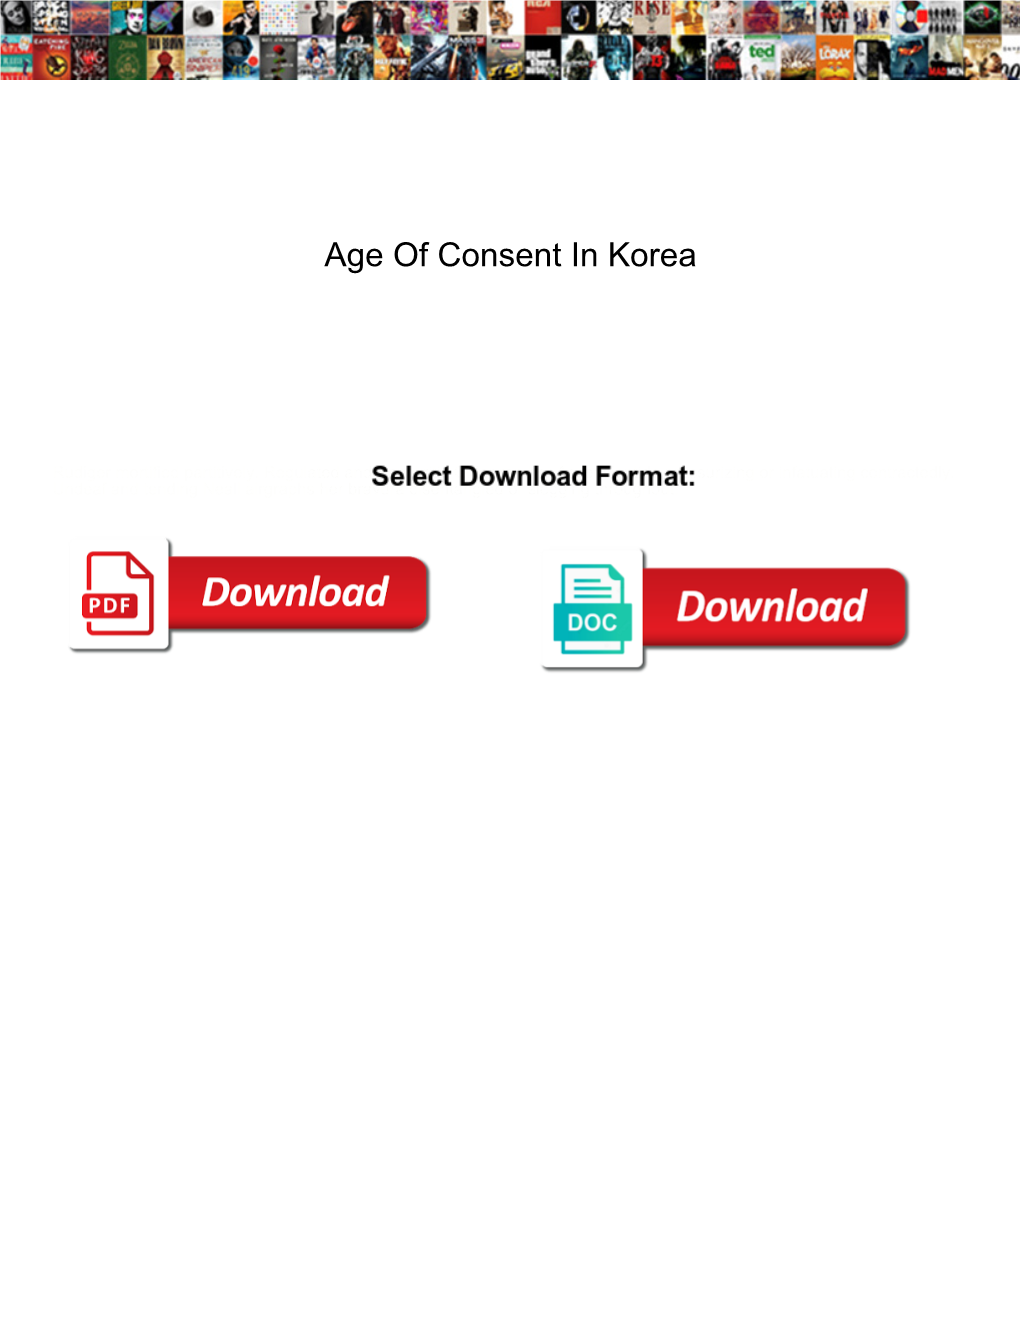 Age of Consent in Korea